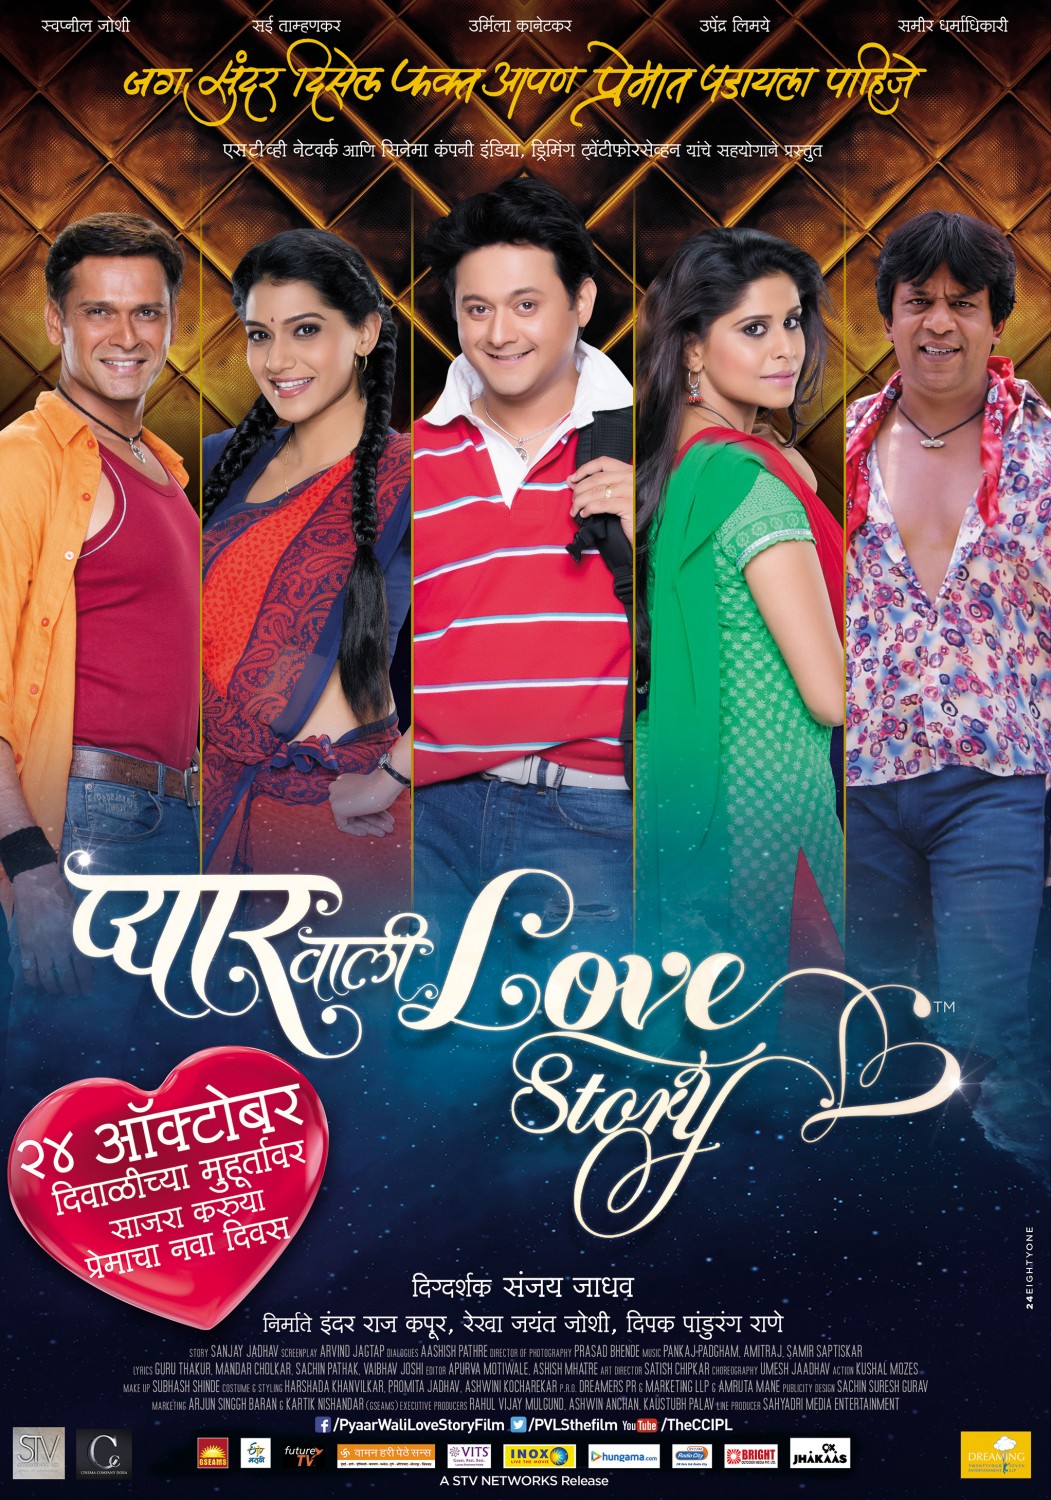 Extra Large Movie Poster Image for Pyaar Vali Love Story (#10 of 10)